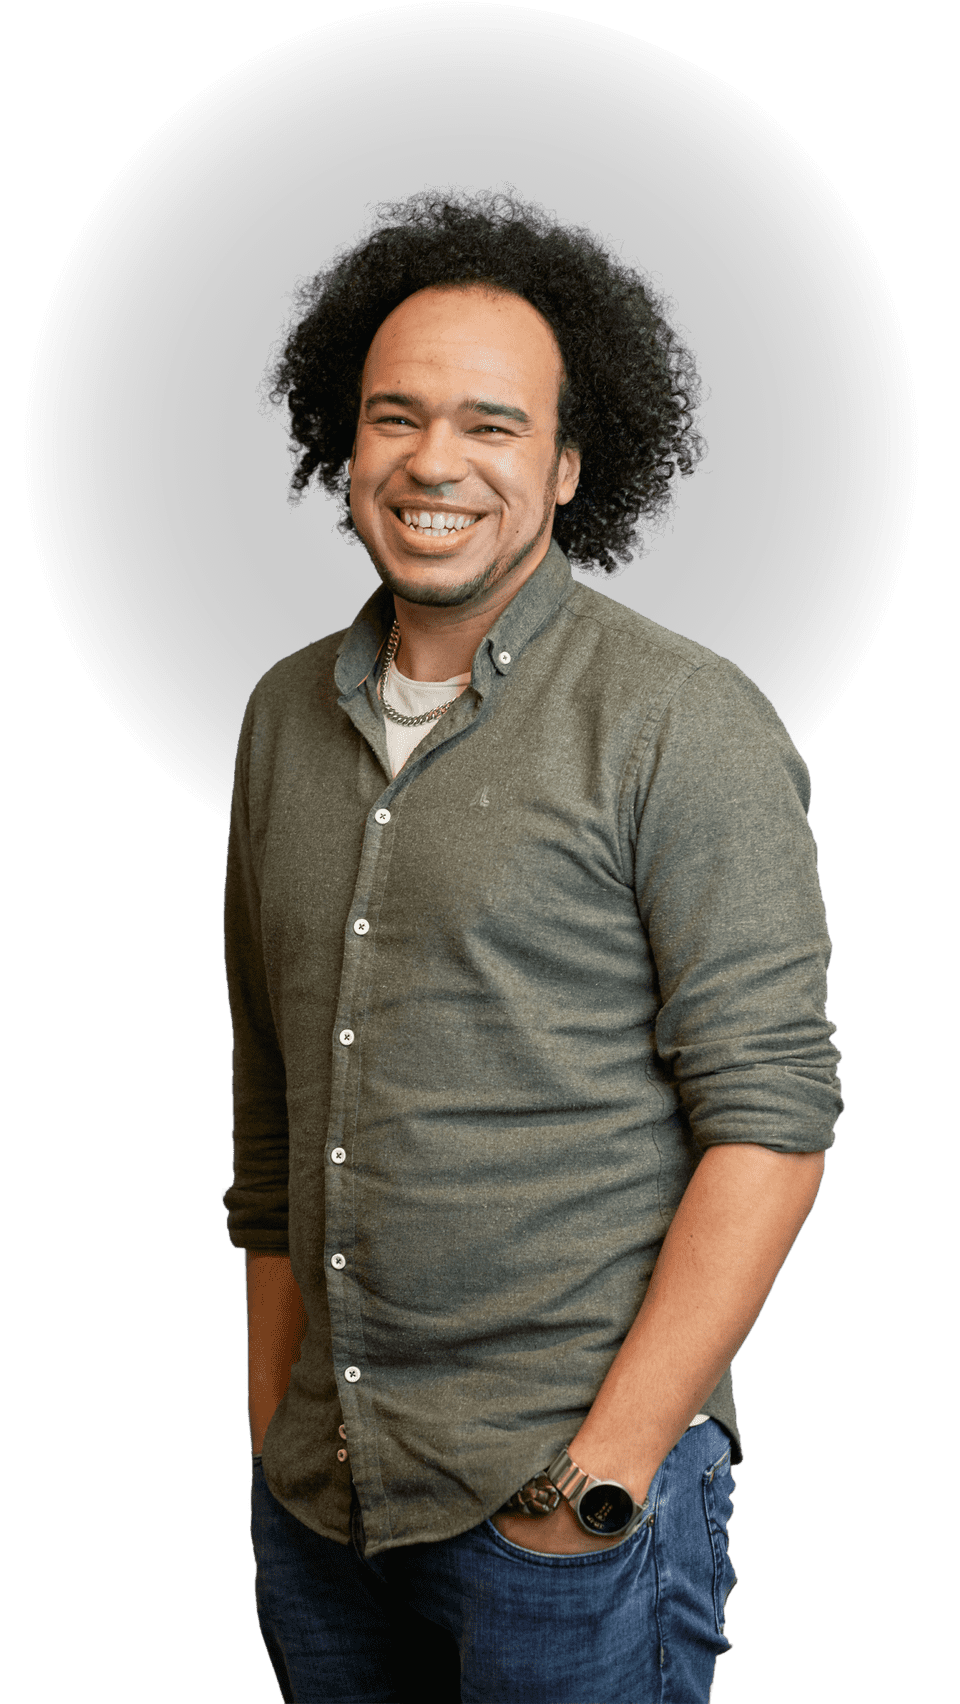 Standing portrait of Kyle Welsby smiling with iconic curly hair